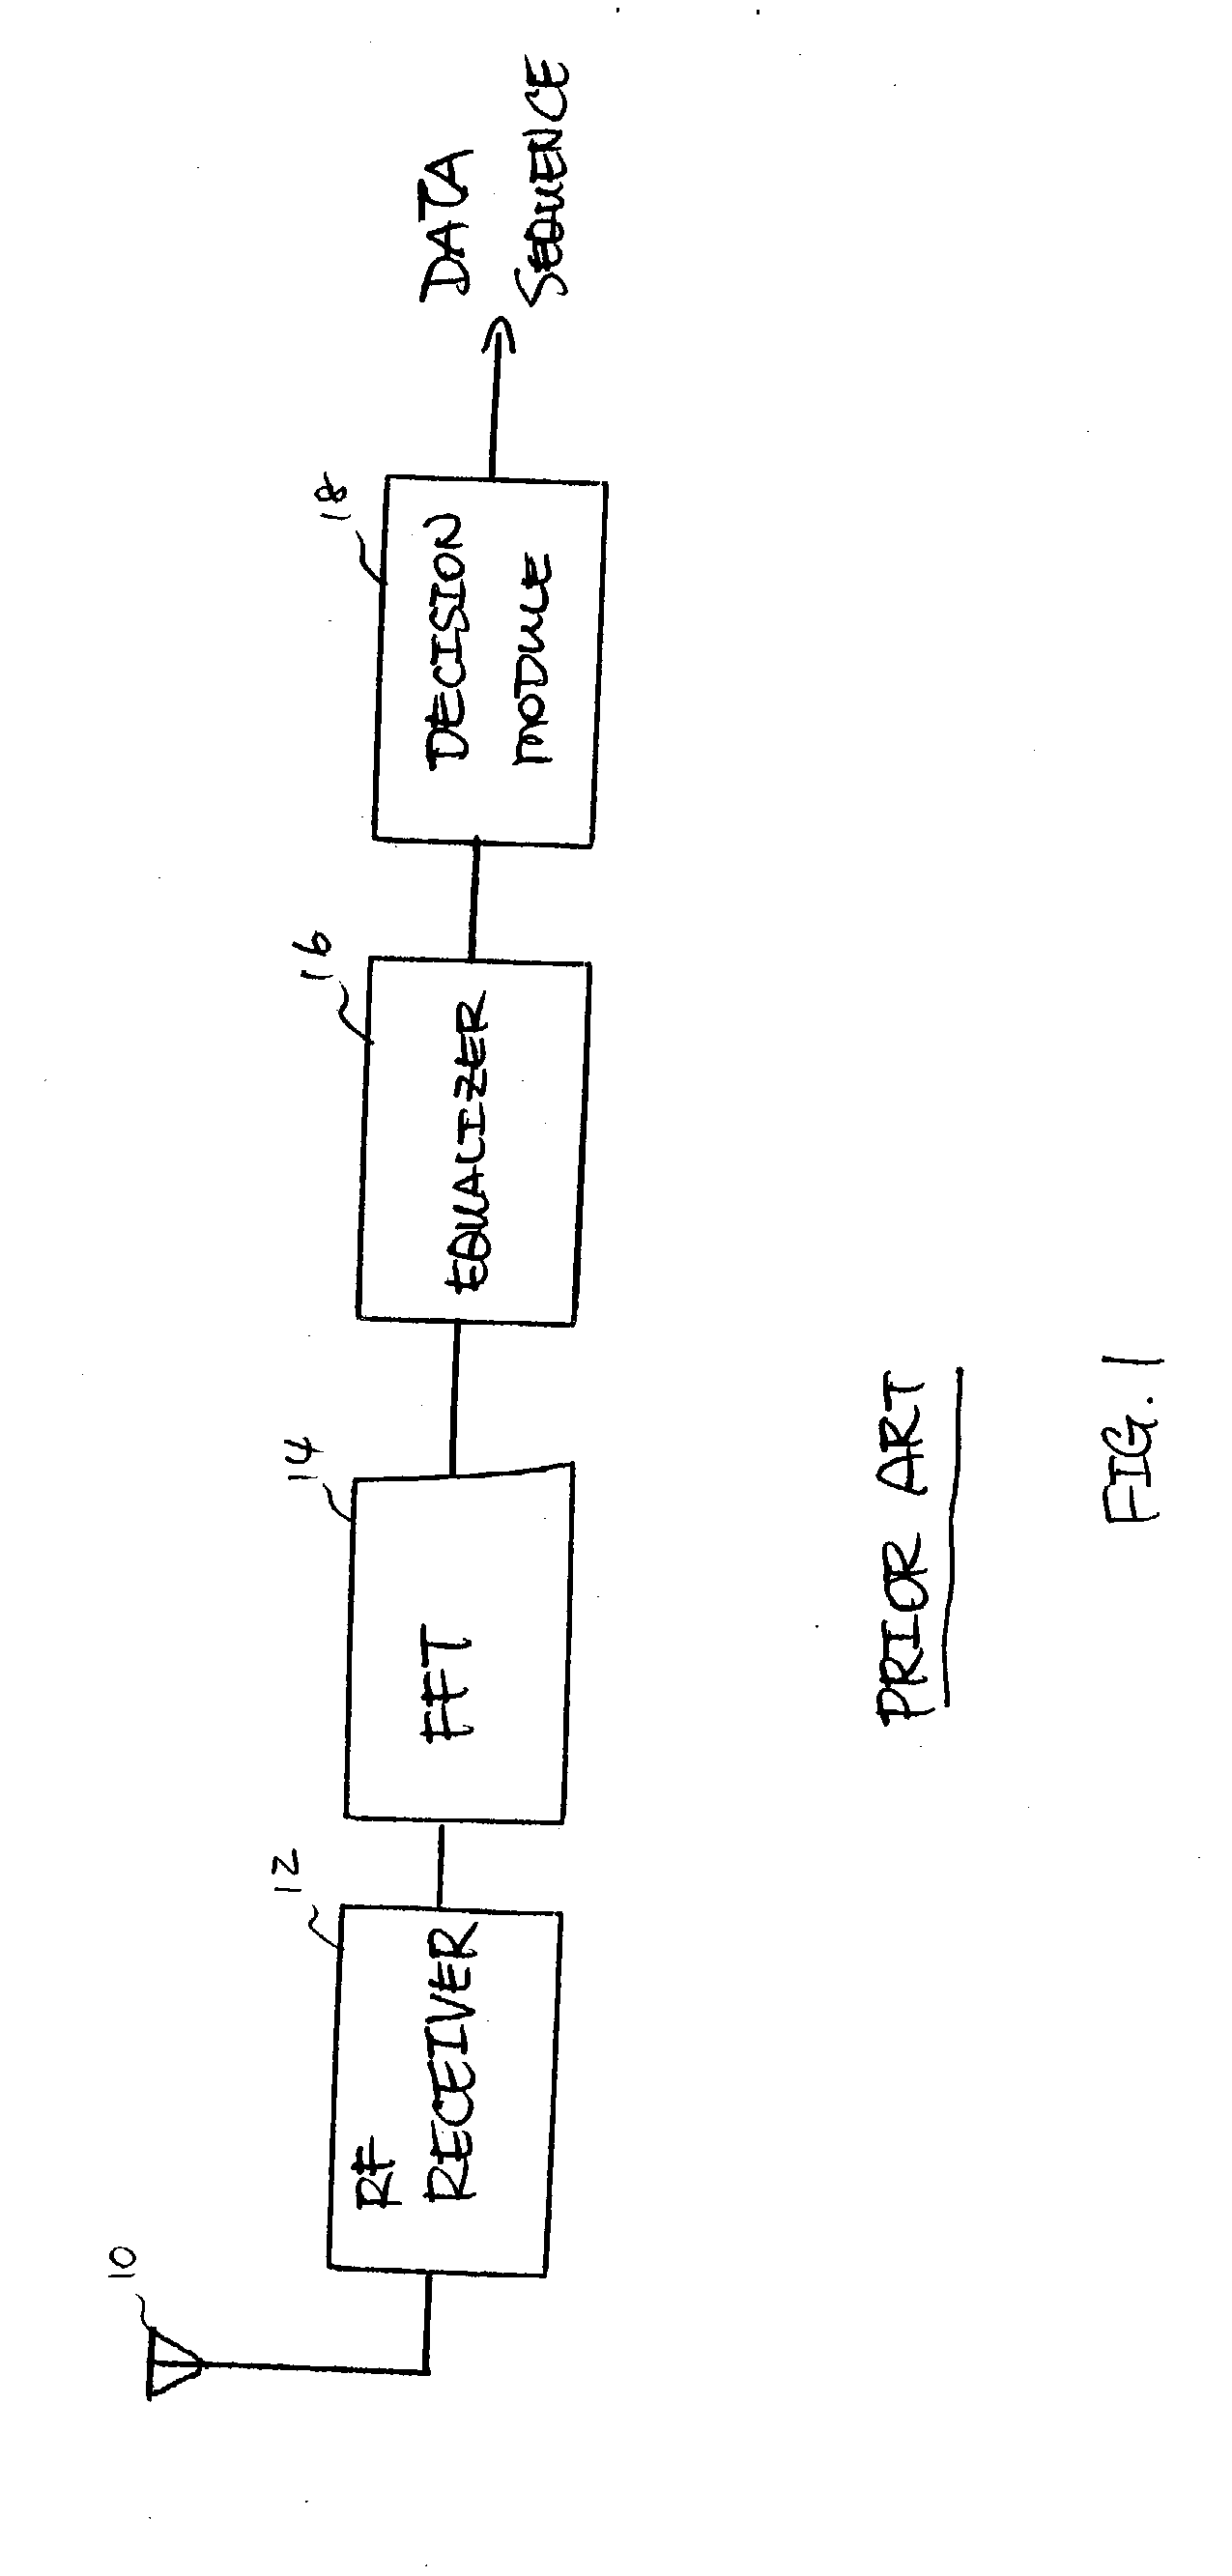 Communication system with adaptive channel correction